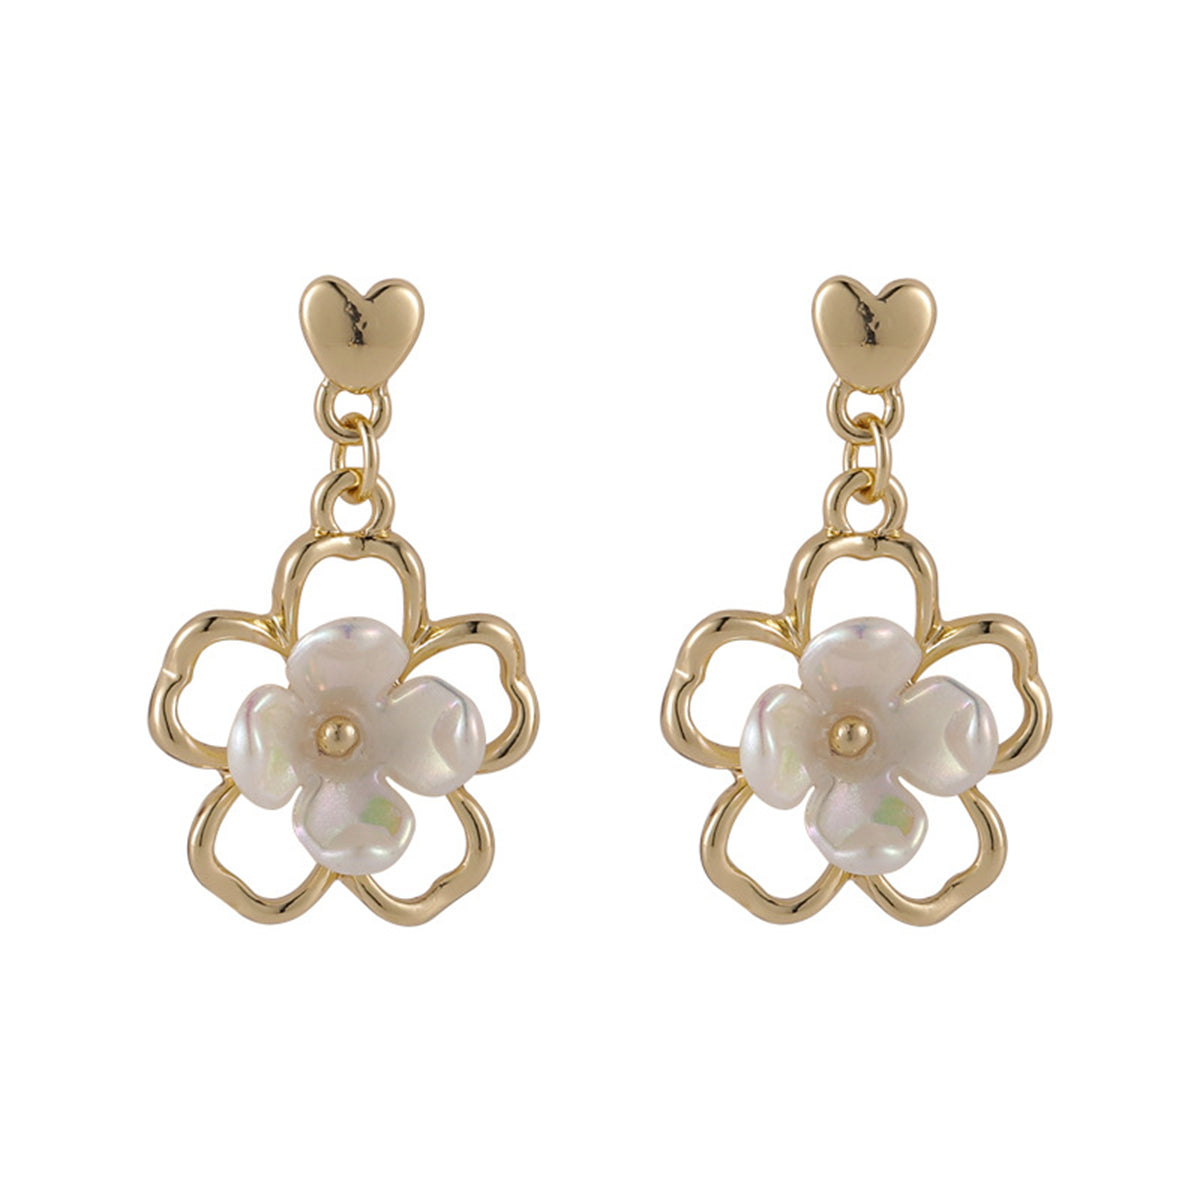 White Acrylic & 18K Gold-Plated Floral Heart Drop Earrings